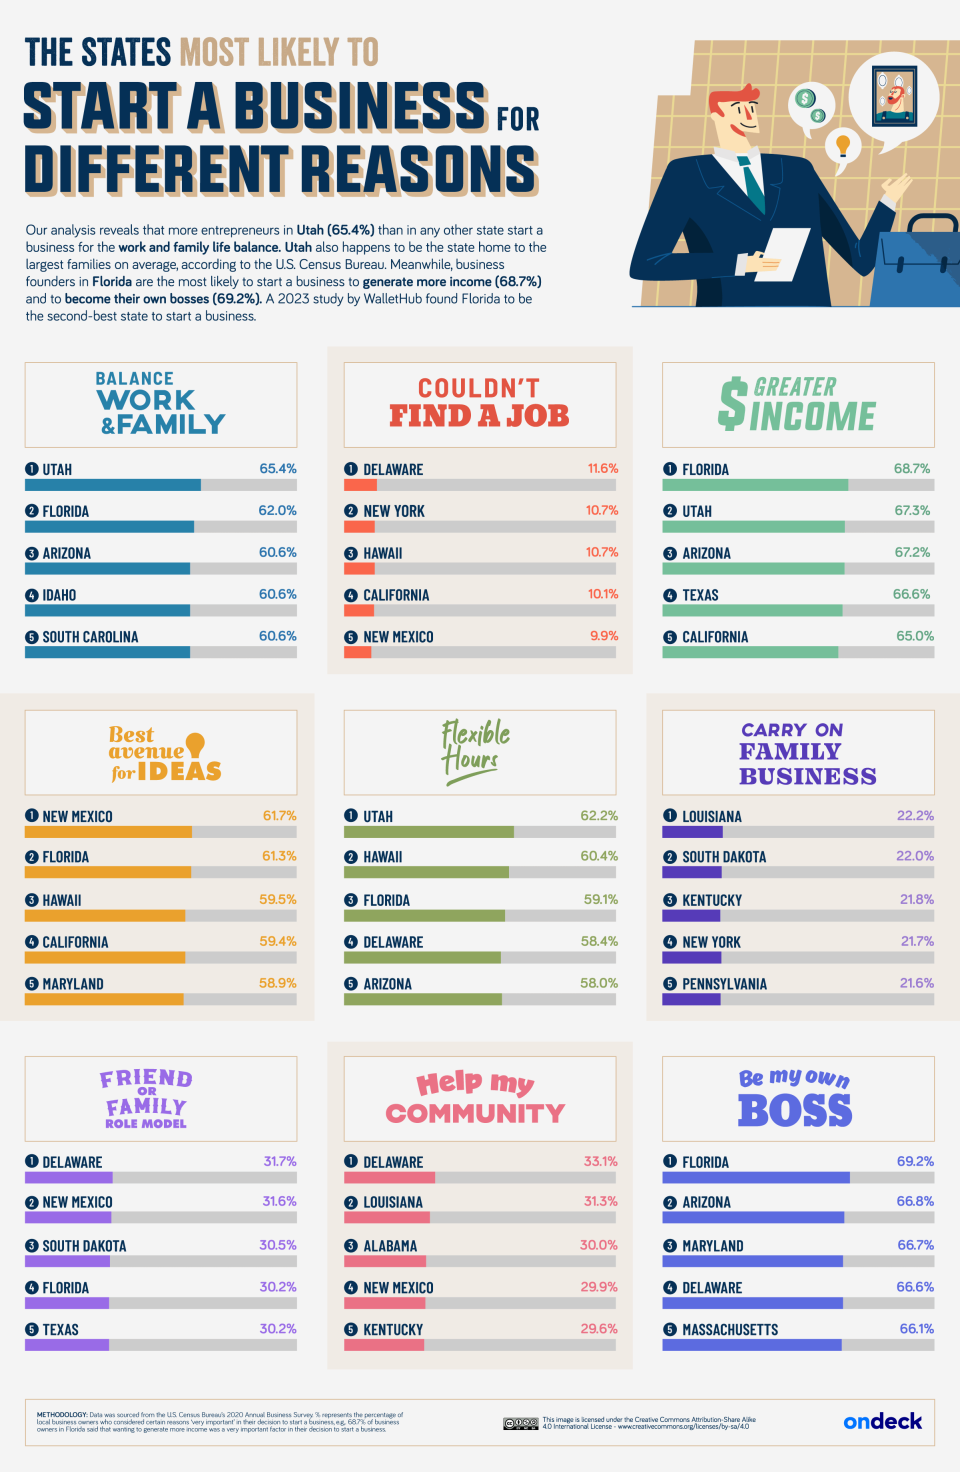 An infographic from OnDeck that shows which states rank in the top 5 for each category of why entrepreneurs start their businesses across America. | OnDeck